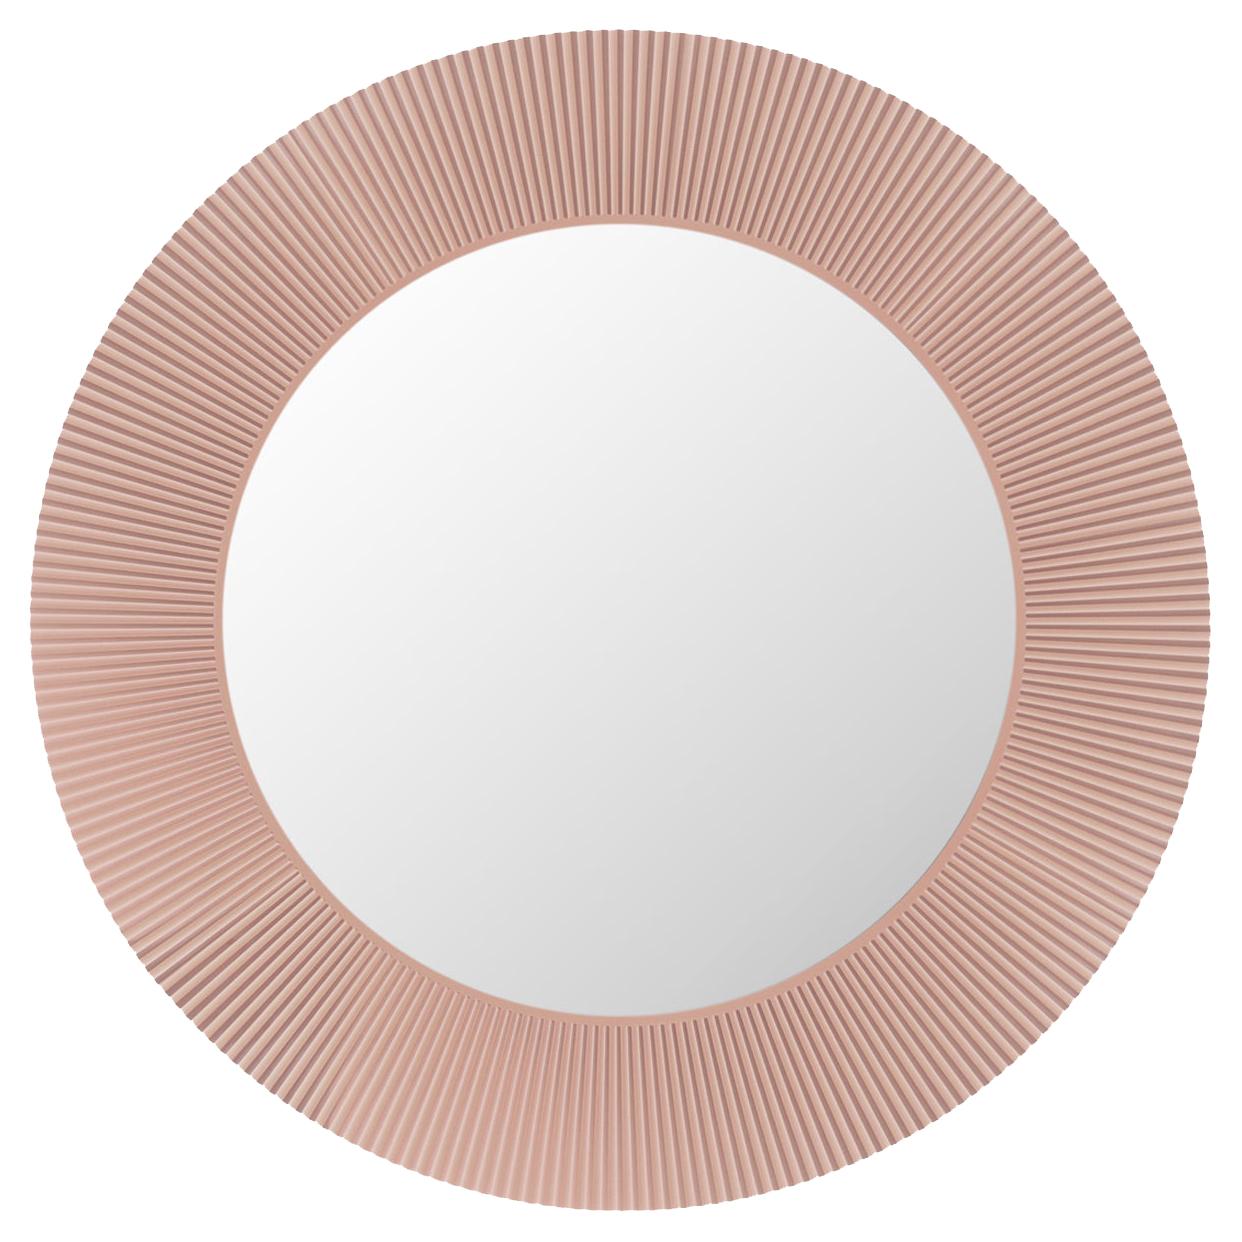 Kartell All Saints Mirror in Nude by Ludovica and Roberto Palomba For Sale